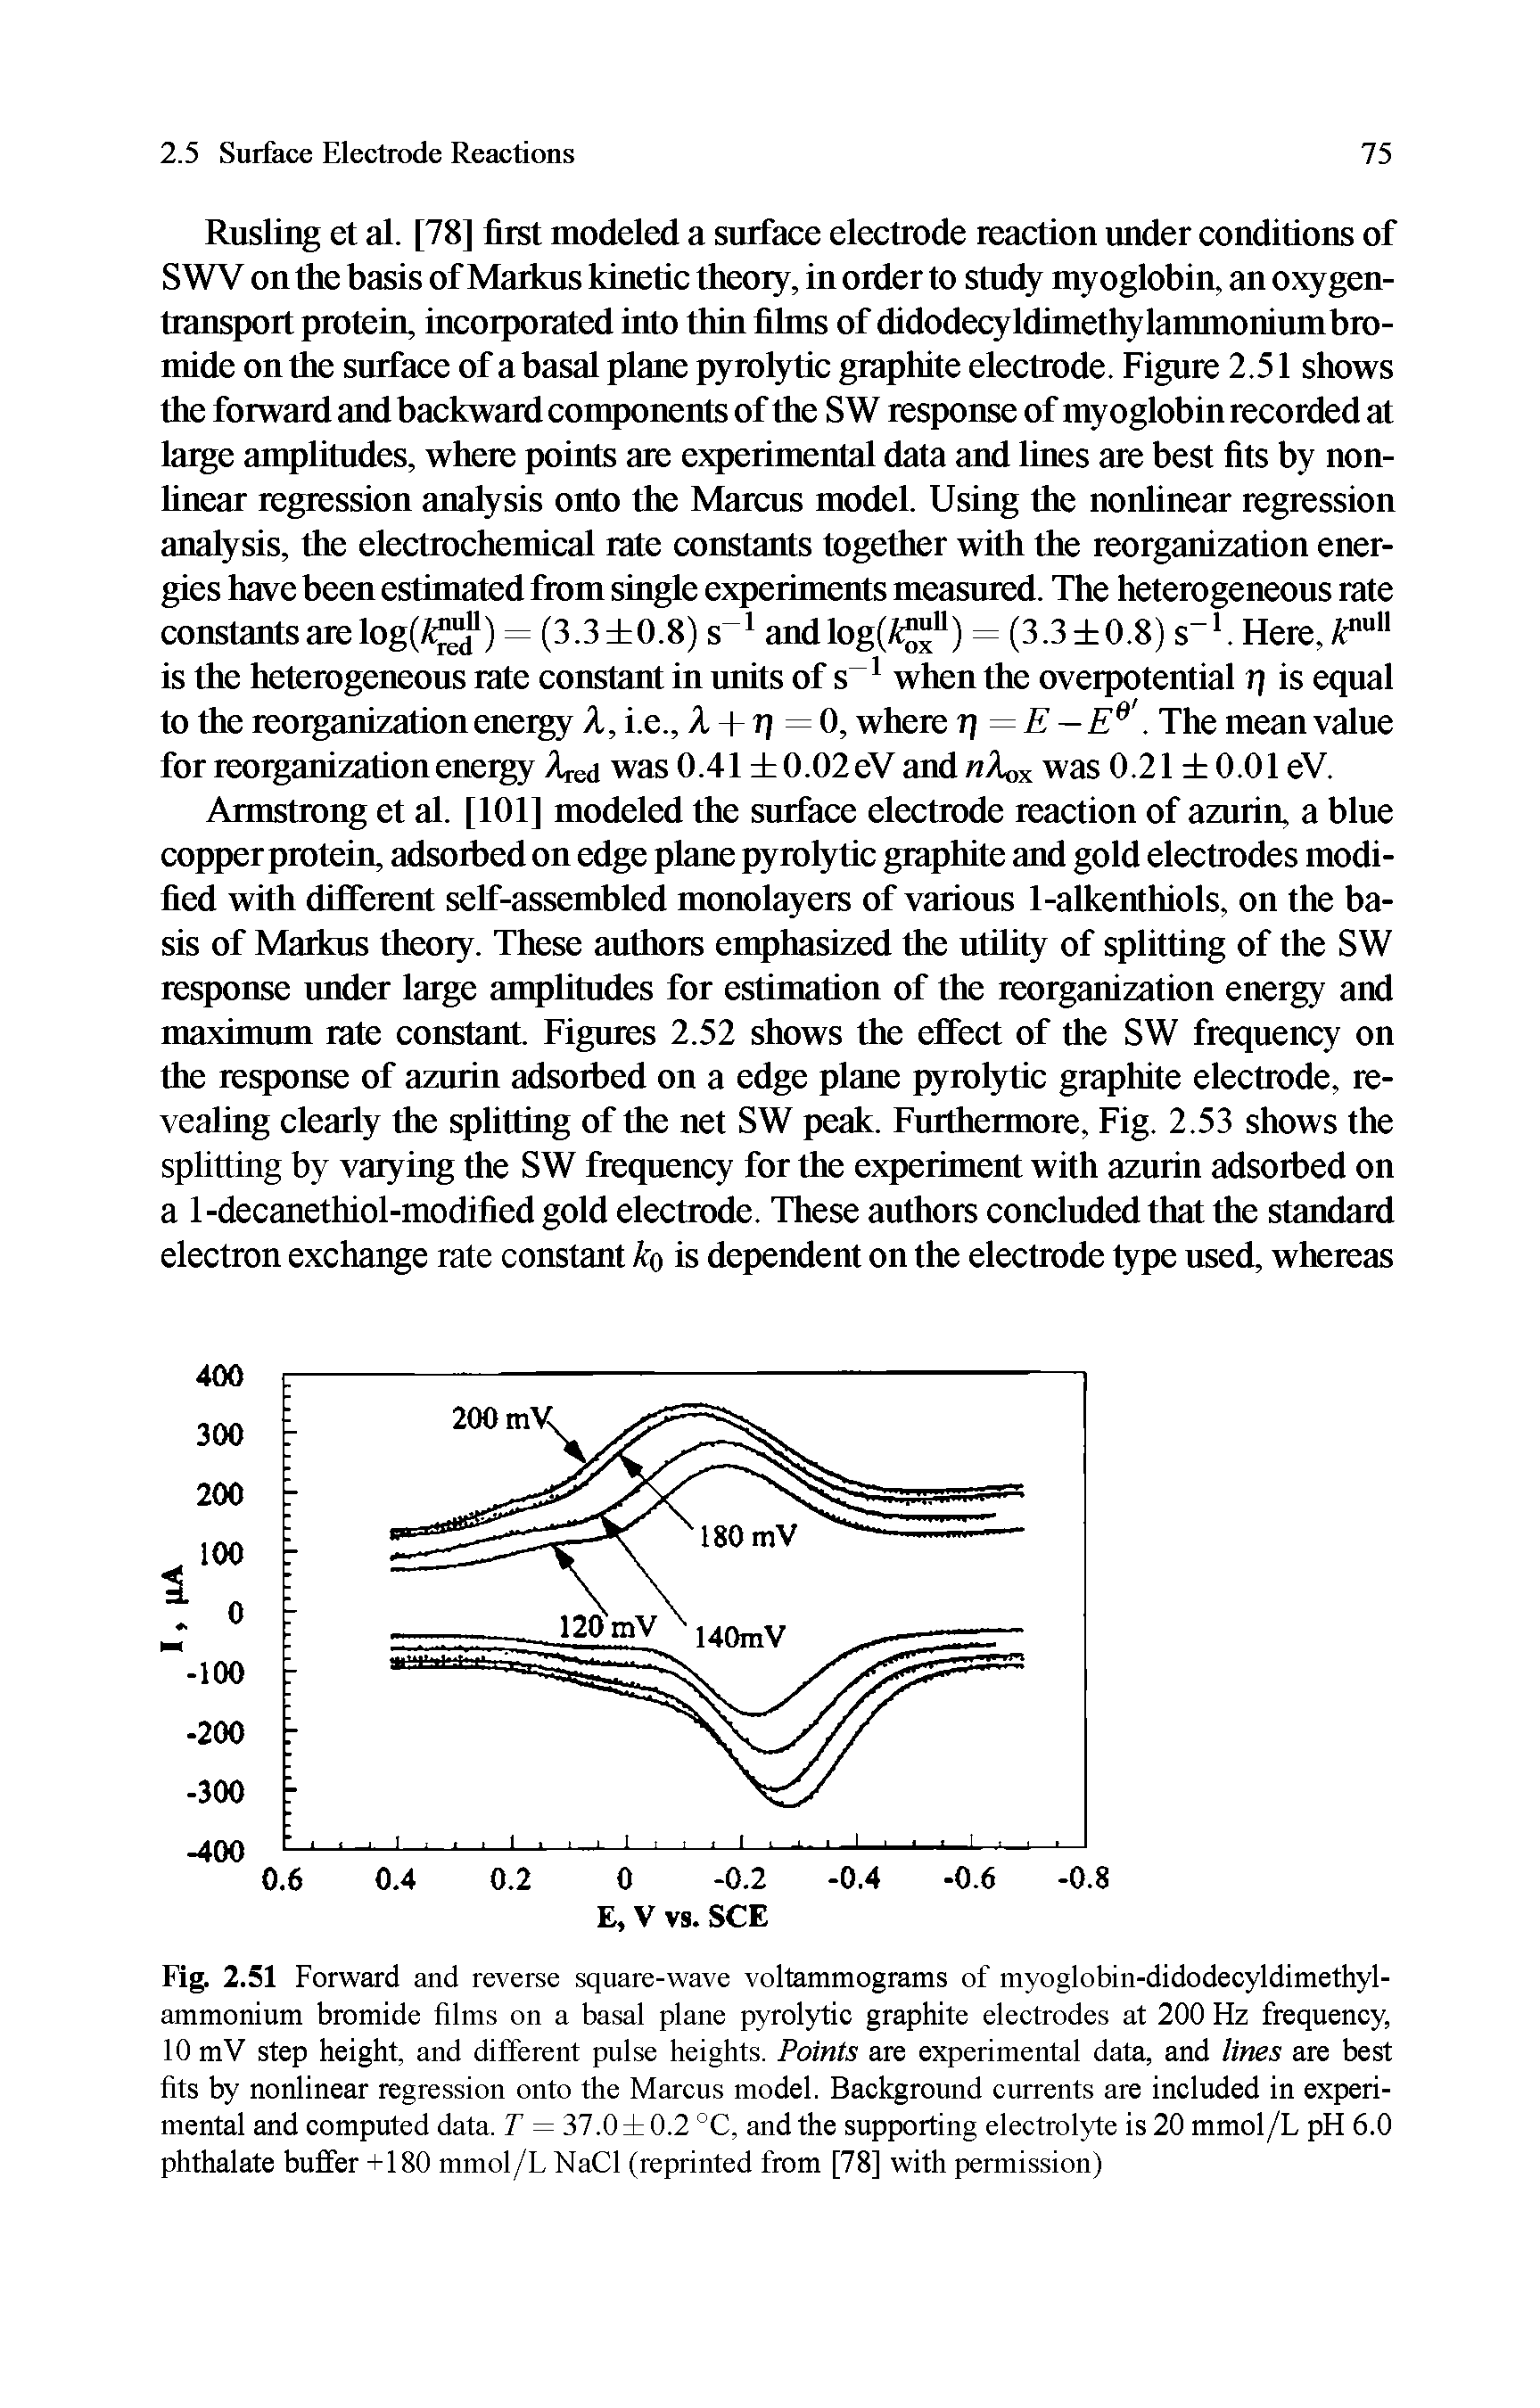 Fig. 2.51 Forward and reverse square-wave voltammograms of myoglobin-didodecyldimethyl-ammonium bromide films on a basal plane pyrolytic graphite eleetrodes at 200 Hz frequency, 10 mV step height, and different pulse heights. Points are experimental data, and lines are best fits by nonlinear regression onto the Mareus model. Baekground eurrents are ineluded in experimental and eomputed data. T = 37.0 0.2 °C, and the supporting eleetrolyte is 20 mmol/L pH 6.0 phthalate buffer +180 mmol/L NaCl (reprinted from [78] with permission)...